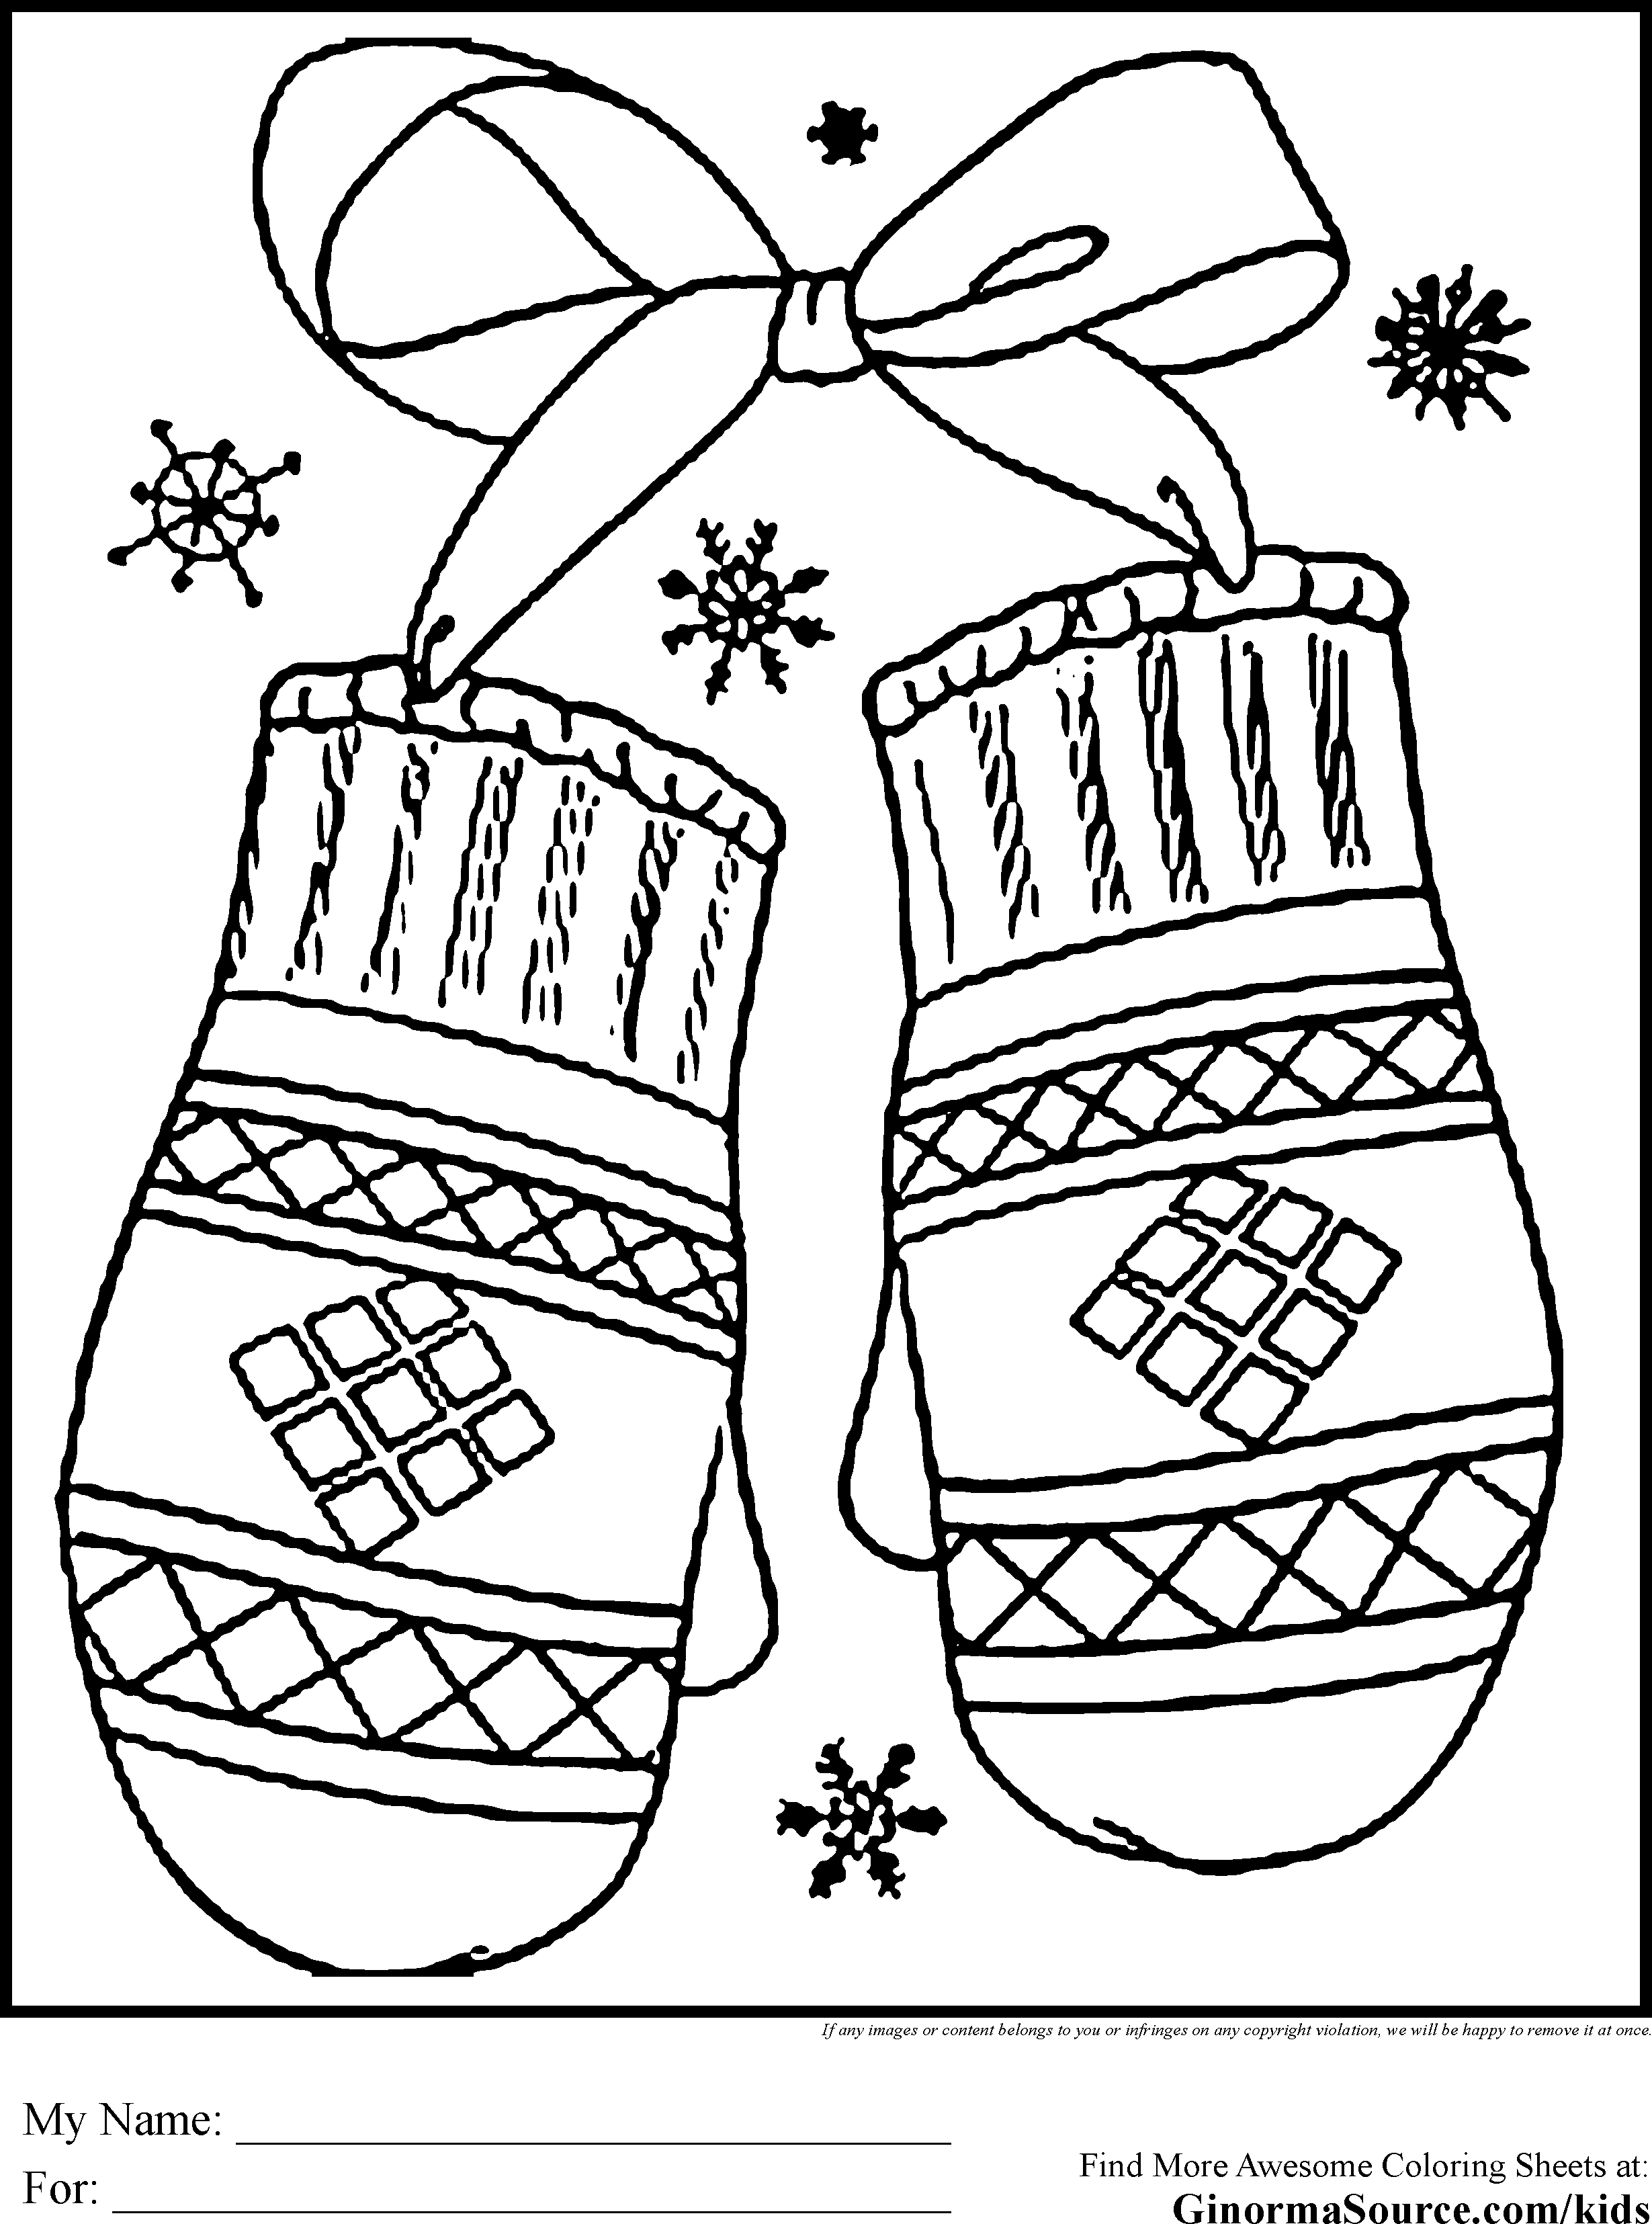 printable-winter-coloring-pages-coloringme